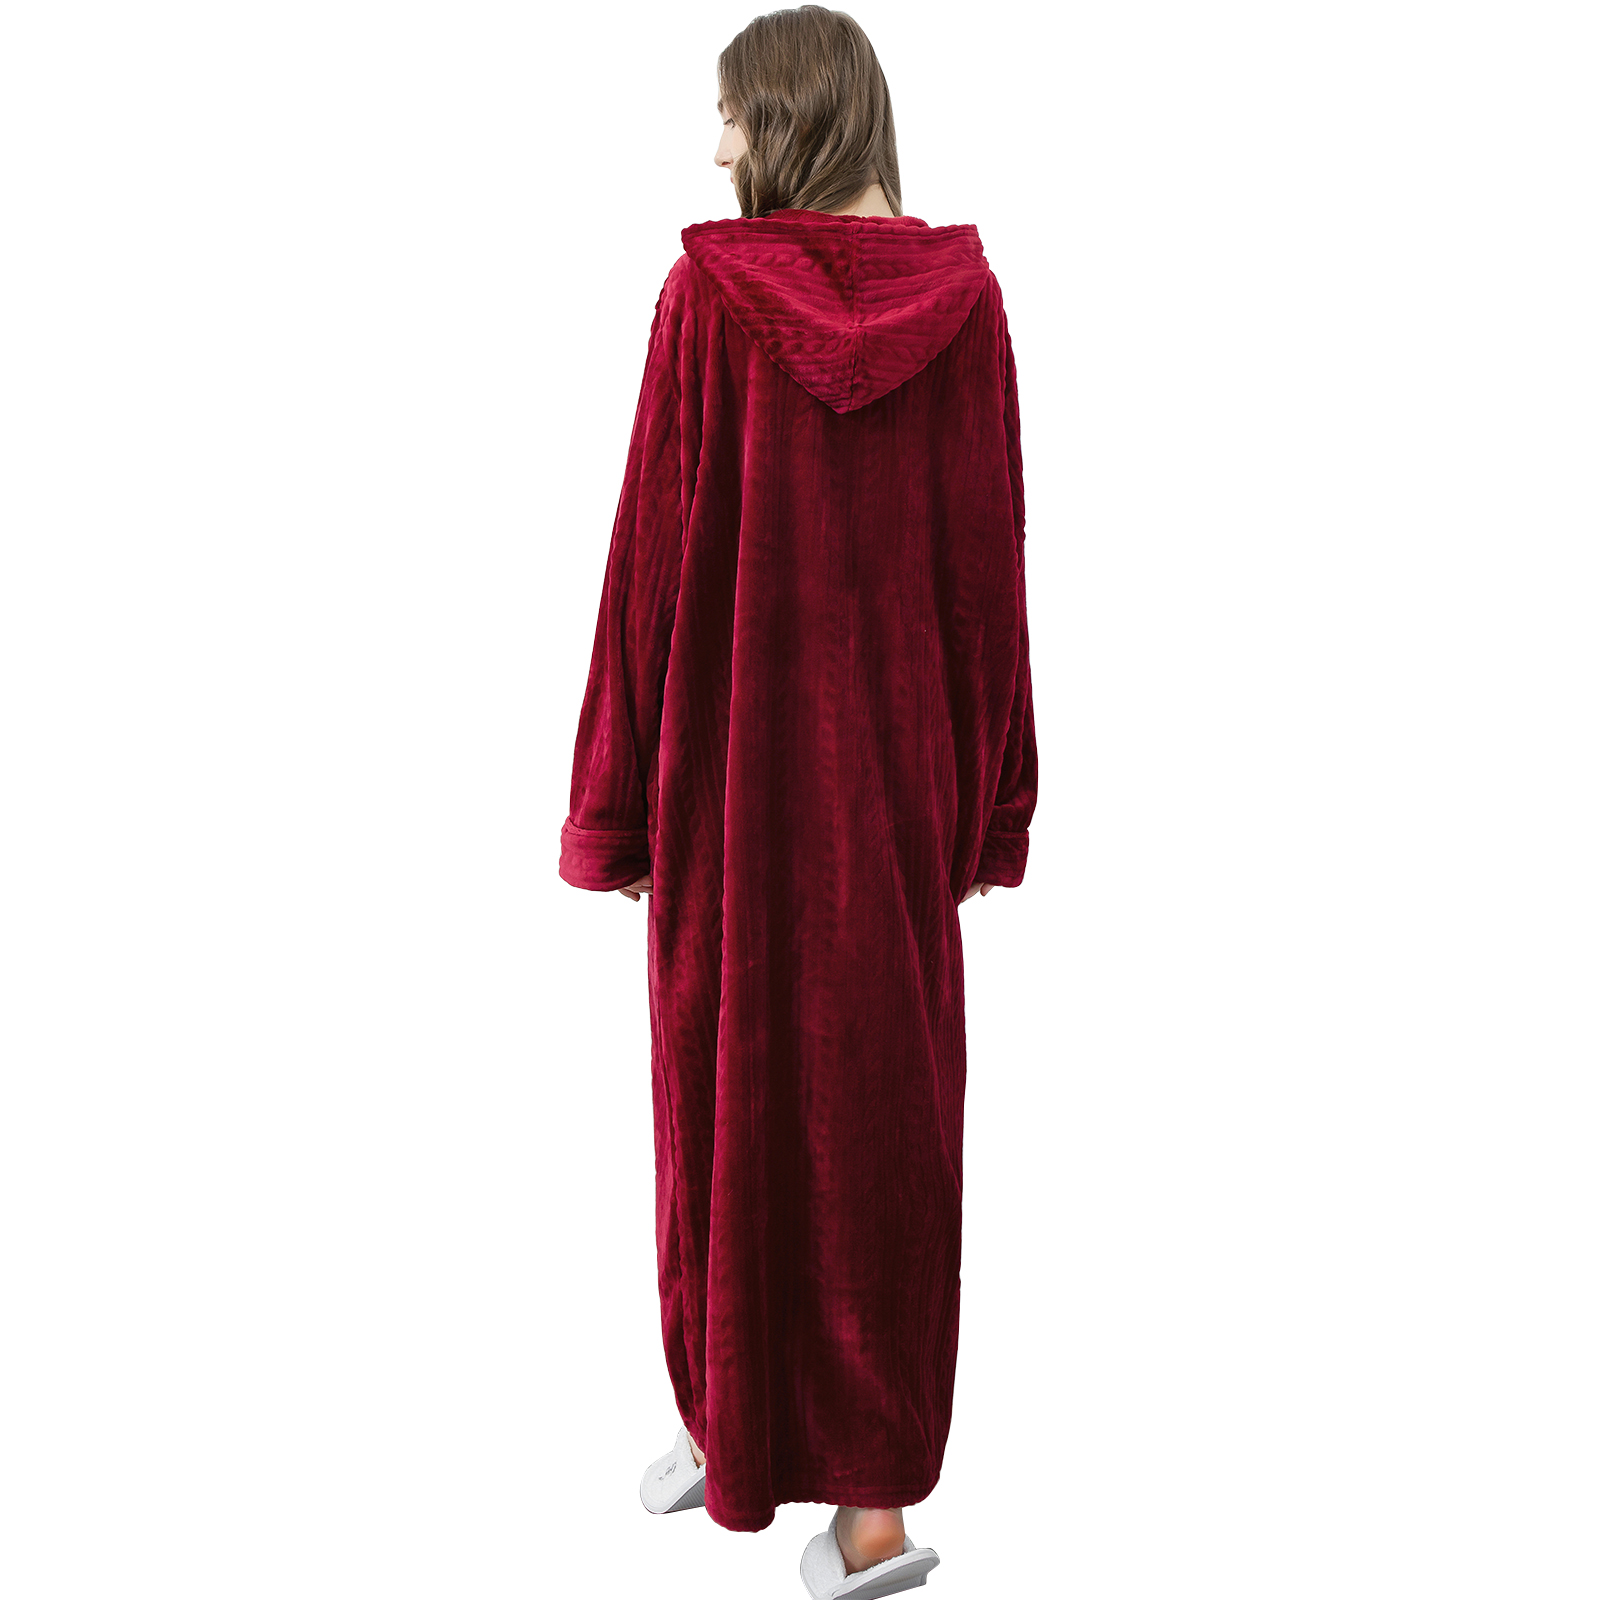 LOFIR Womens Hooded Plush Robe, Zip up Front Soft Fleece Robes for Women (L/XL, Wine Red) - image 3 of 8